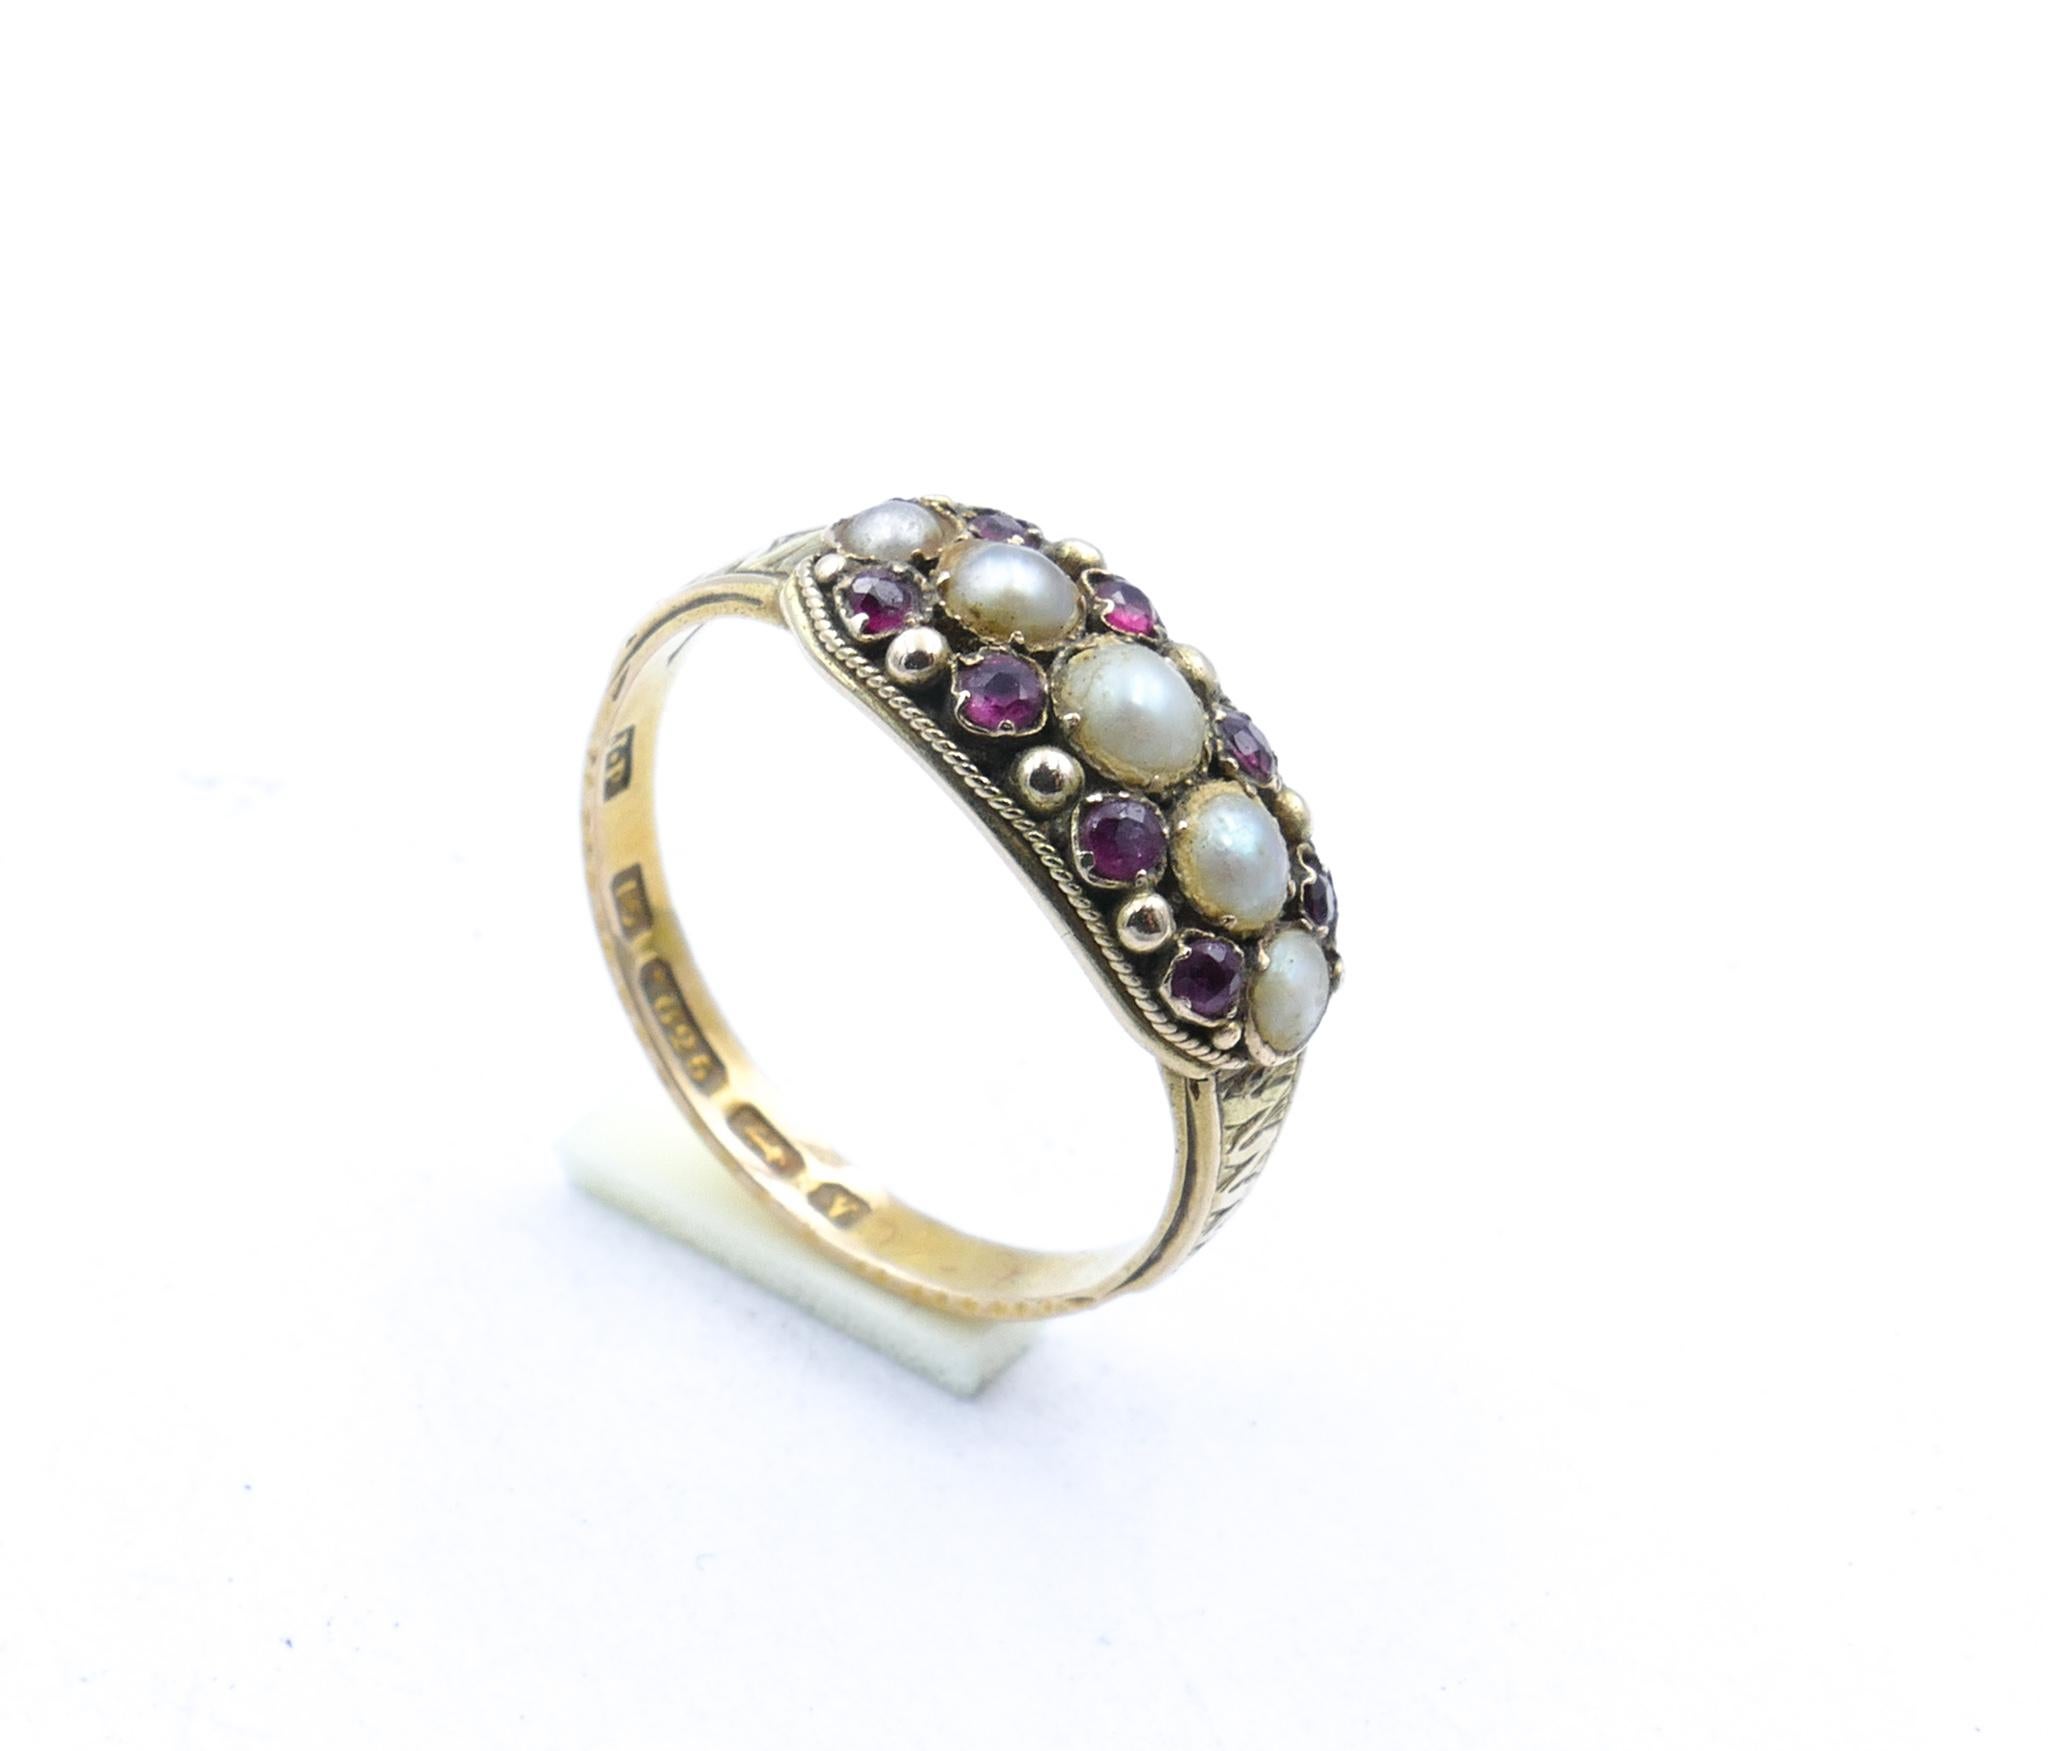 Beautifully hallmarked 'Birmingham', 'J.P', 'N' and beautifully preserved as well, is this gorgeous deeply coloured garnet & Seed Pearl traditional Band Ring.
Just a beautiful Collectors' Item in great condition.
Just look at the Hallmarks!
